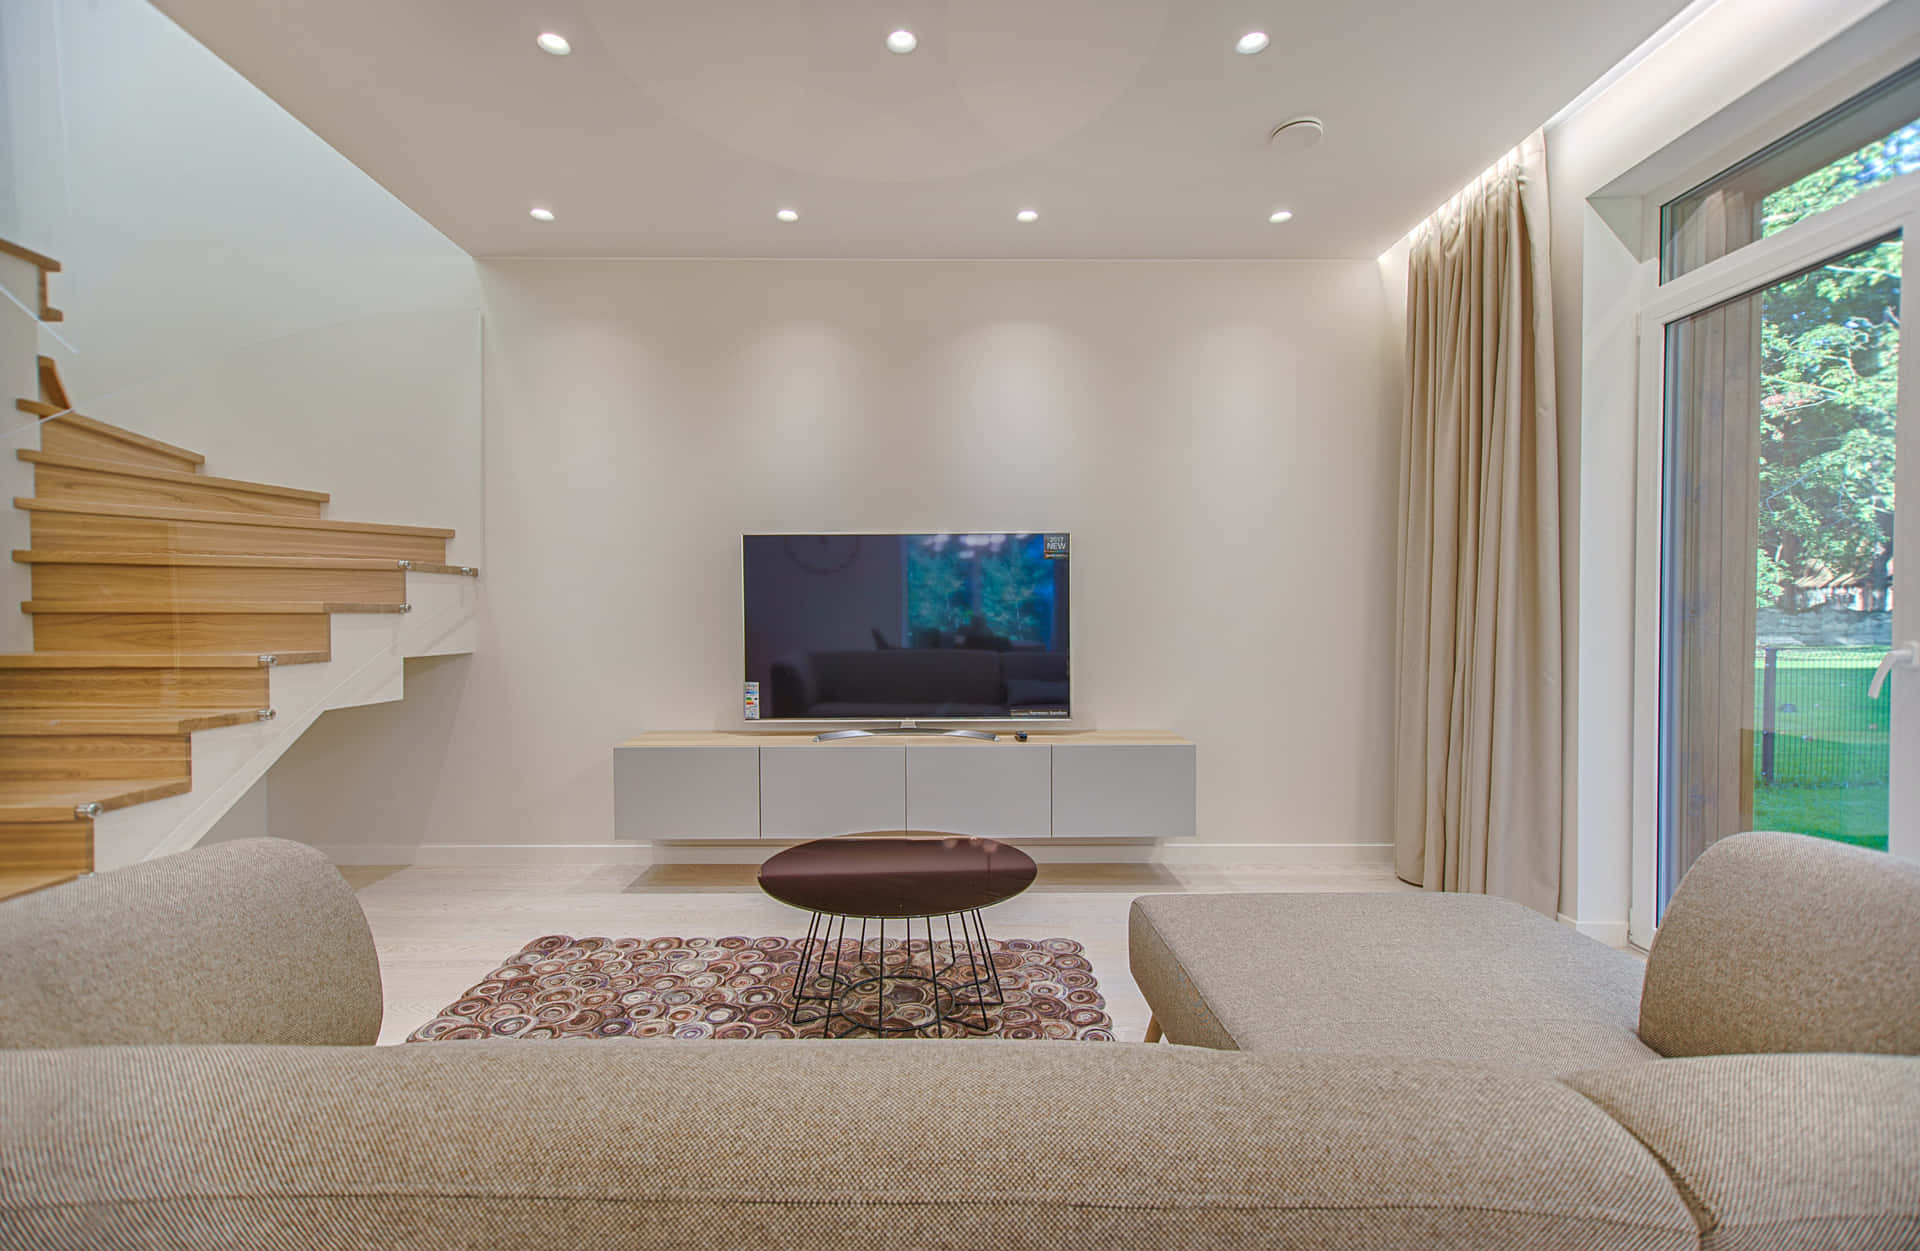 Home Theater Room By Stairs Background